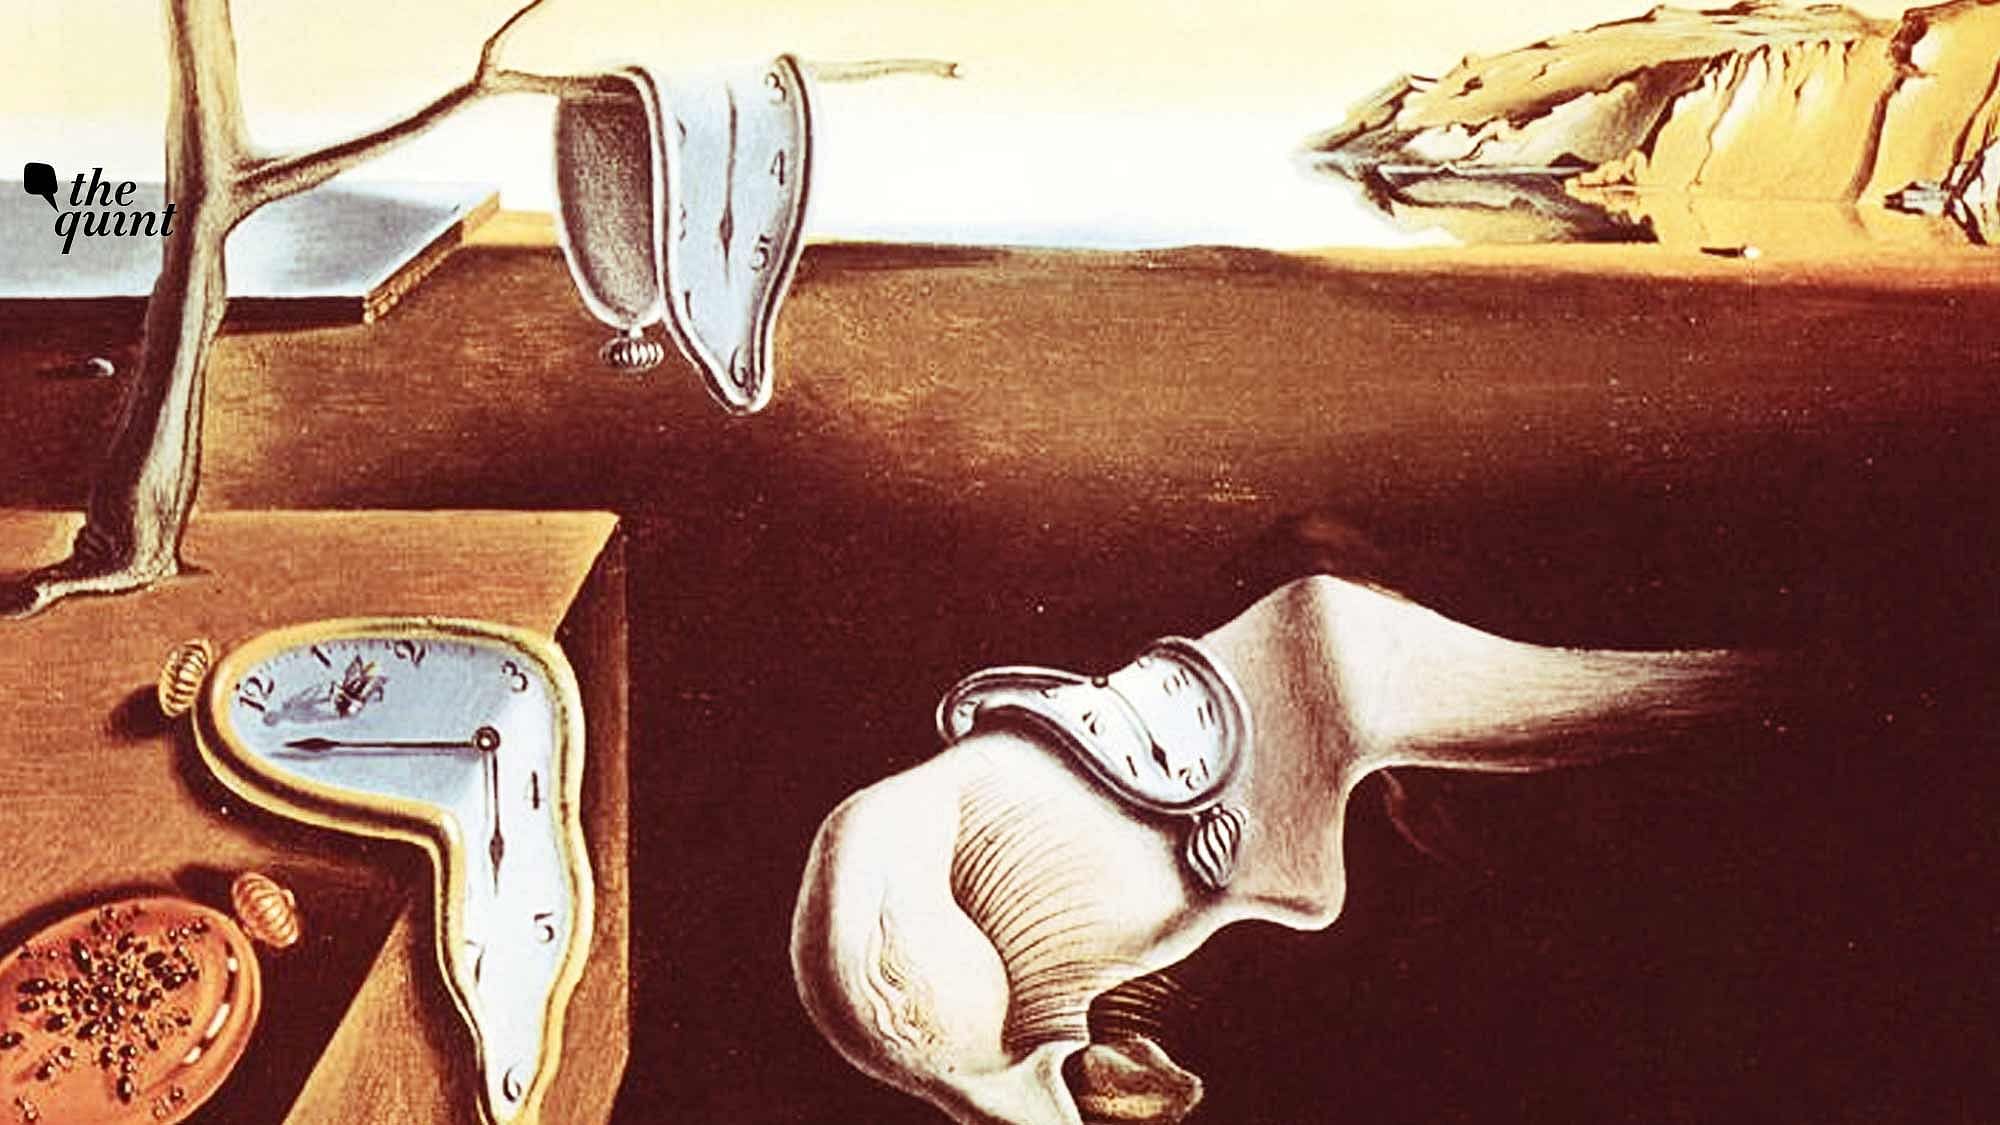 Salvador Dali’s ‘The Persistence of Memory) (1931). Altered image used for representational purposes.